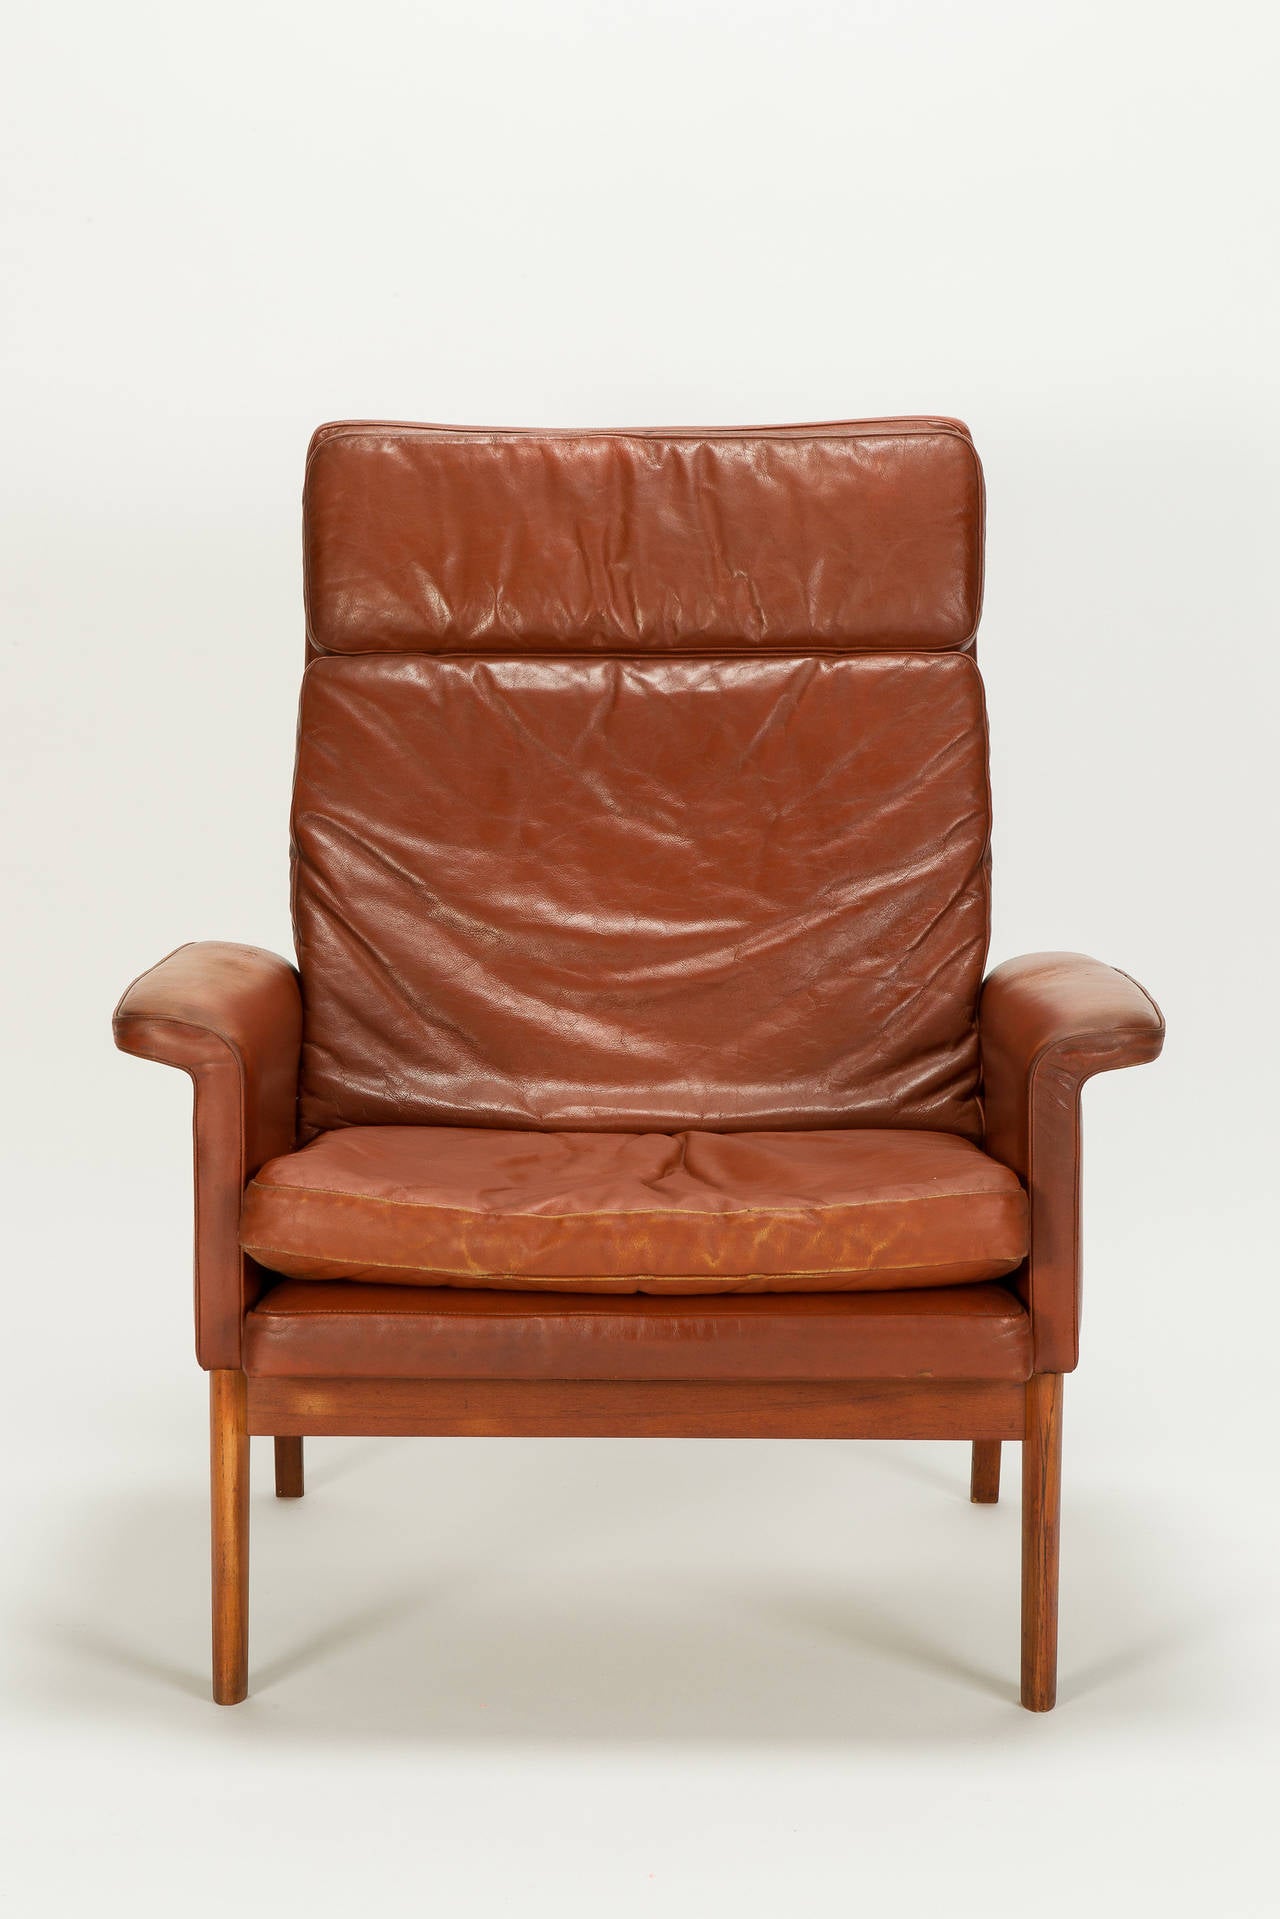 Rare Finn Juhl Jupiter chair, model No 218 for France & Son, designed in 1965, manufactured in Denmark in the mid 1960s. Spring-suspended backrest allows to rock a bit. Original rust colored leather with a nice vintage patina